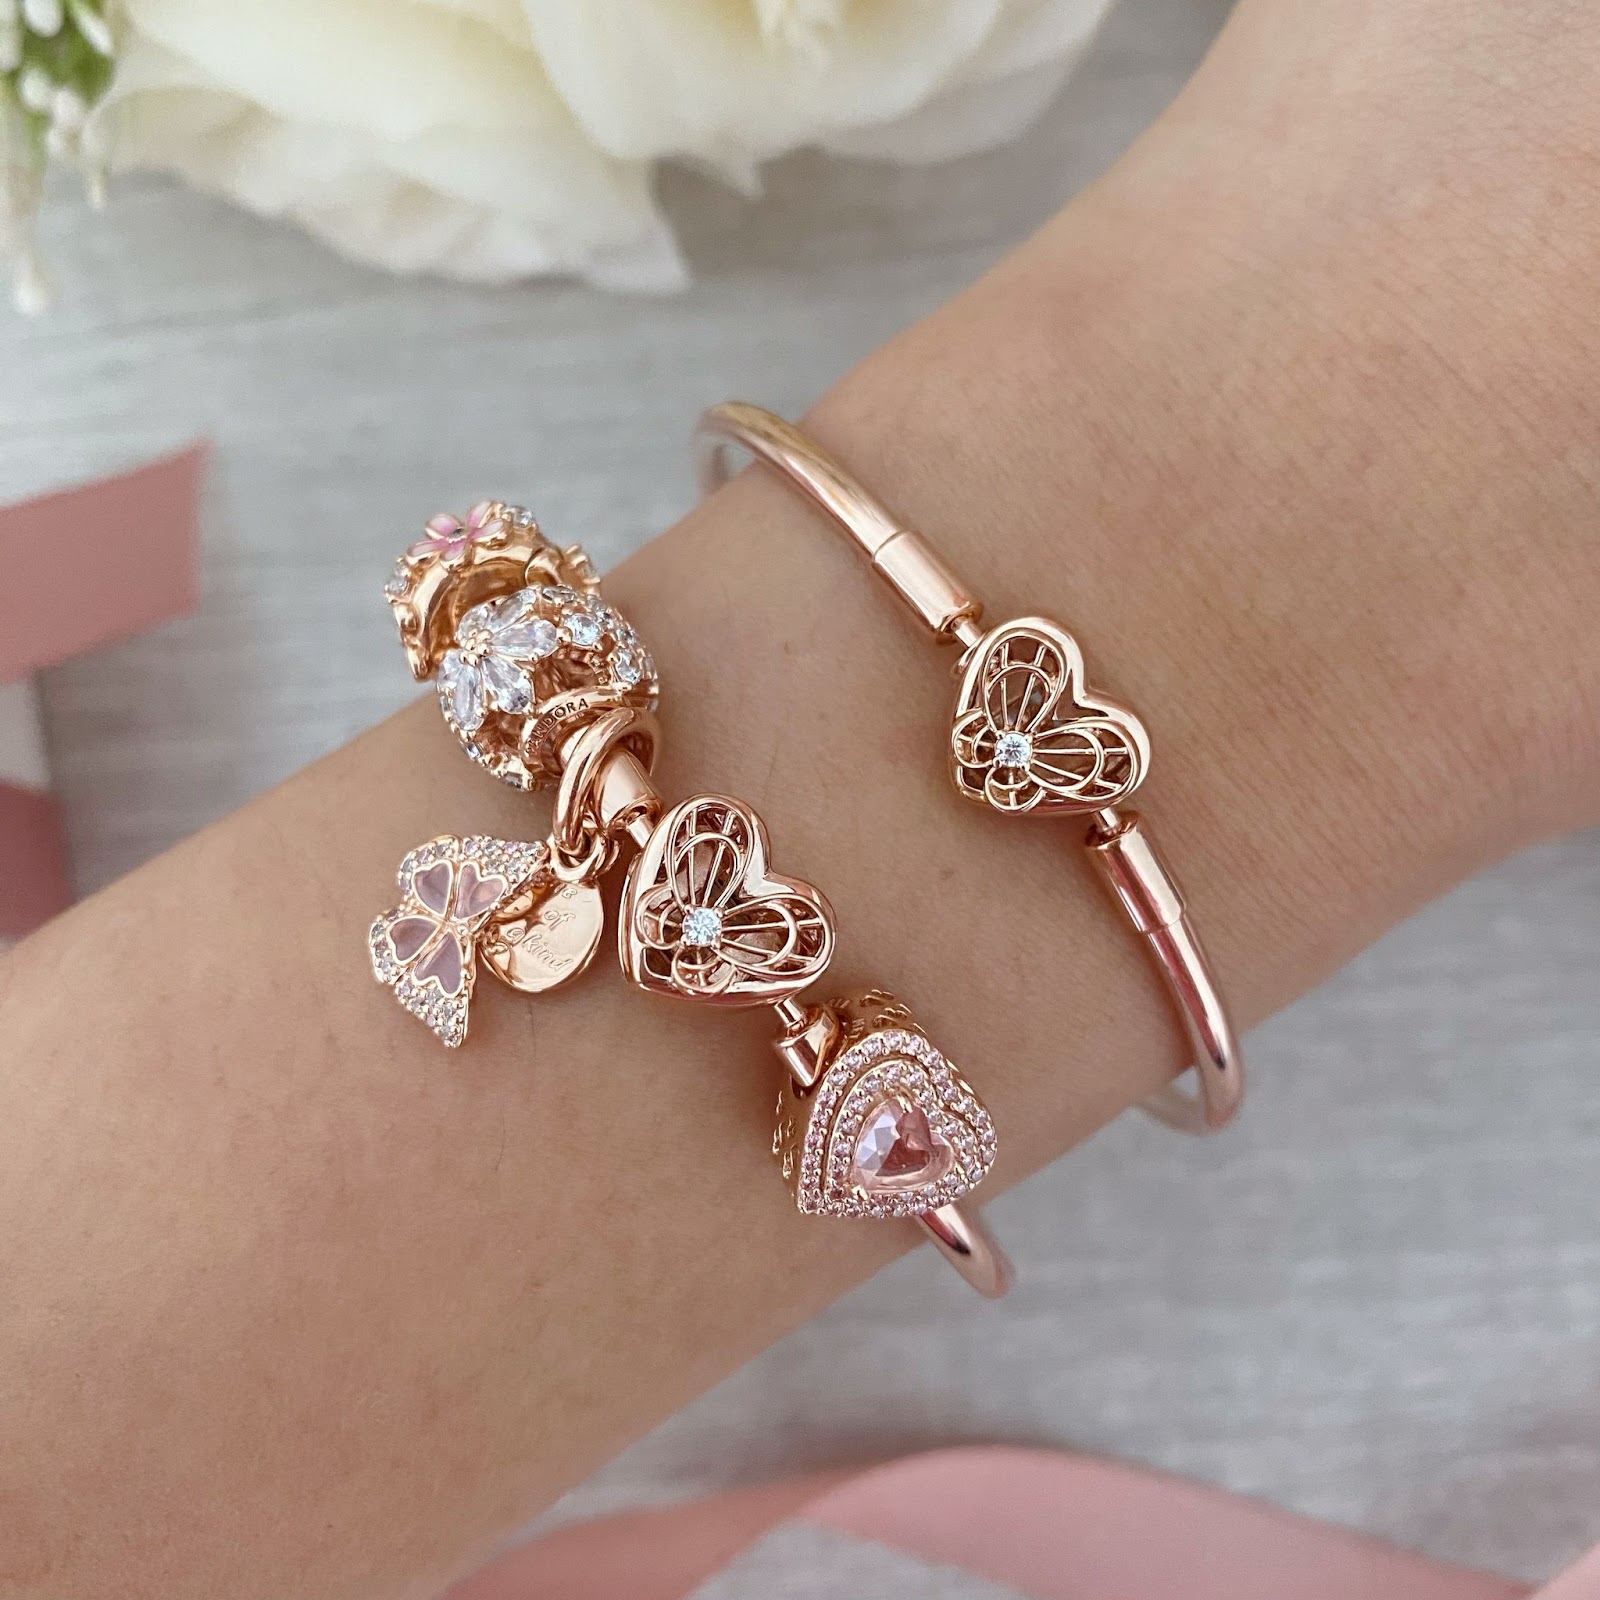 Pink gold Pandora bangle laced with heart shaped charms